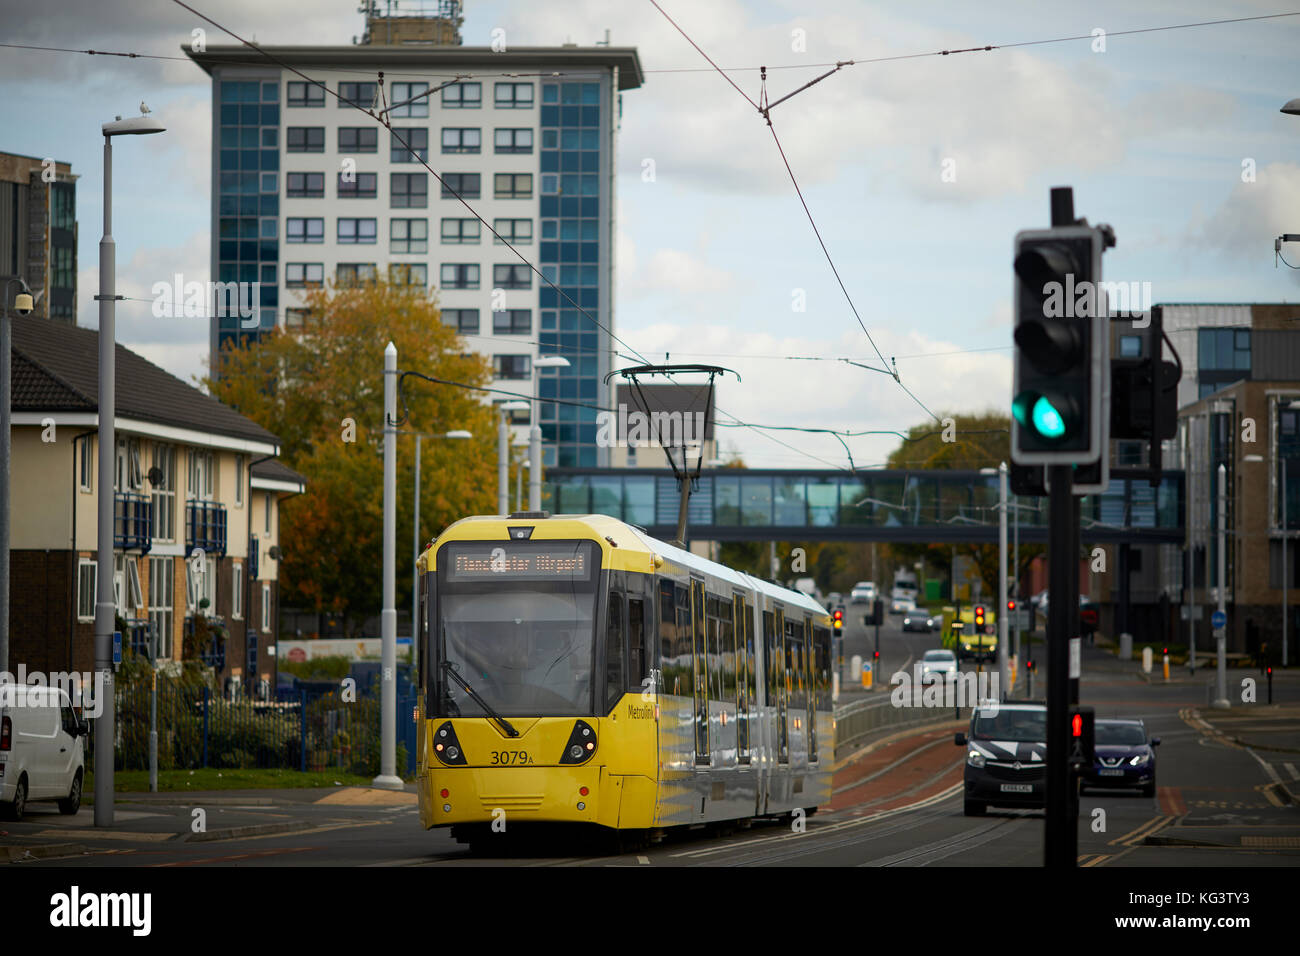 A yellow Metrolink Manchester tram at Hollyhedge Road, Benchill, Wythenshawe. Village 135 retirement housing for the over 55's Stock Photo